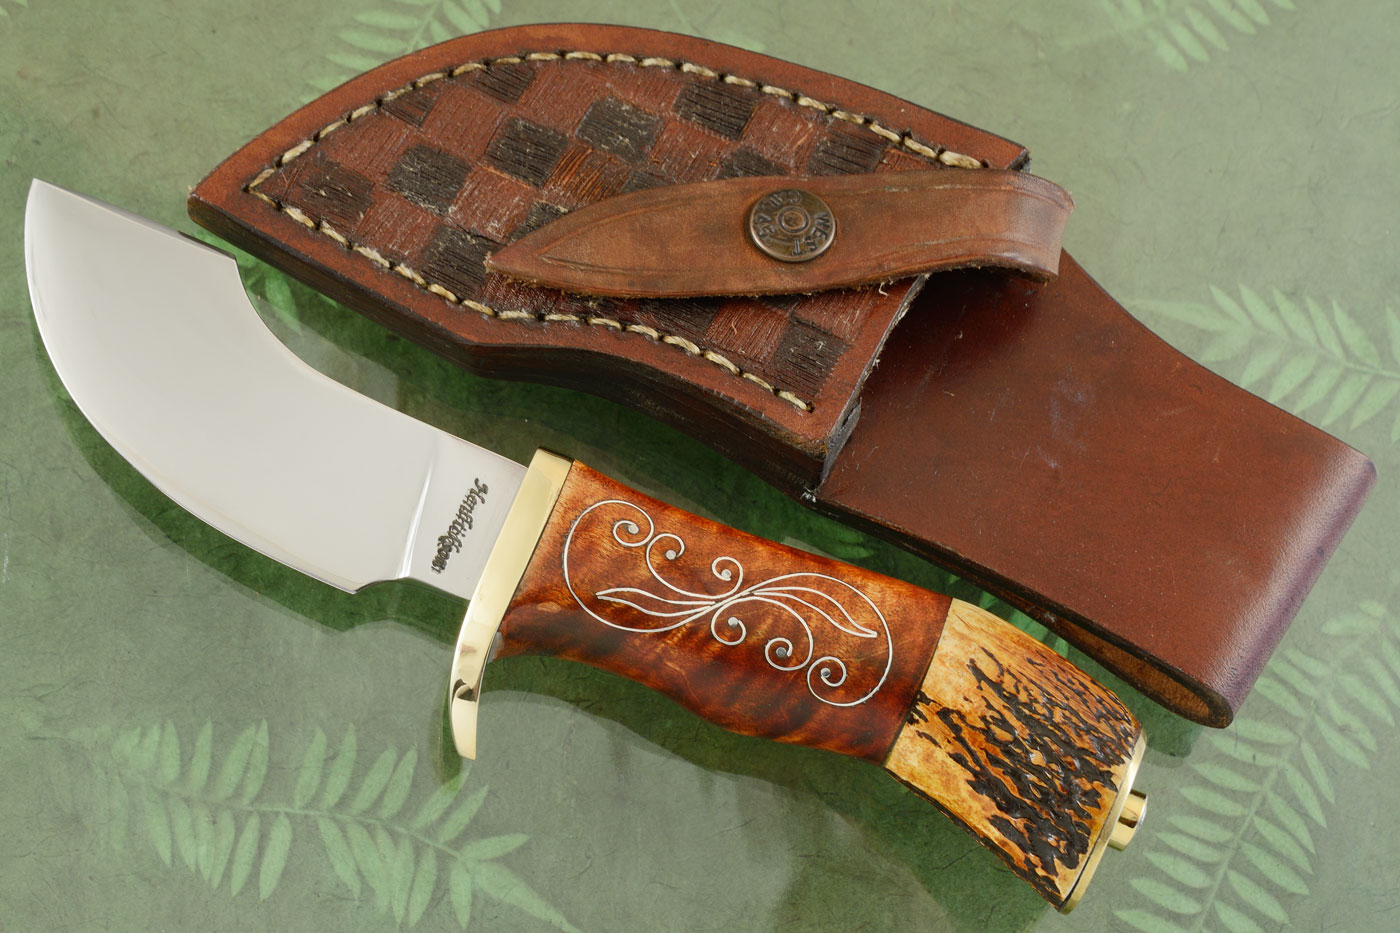 Alaskan Ulu Hunter with Curly Redwood and Indian Stag